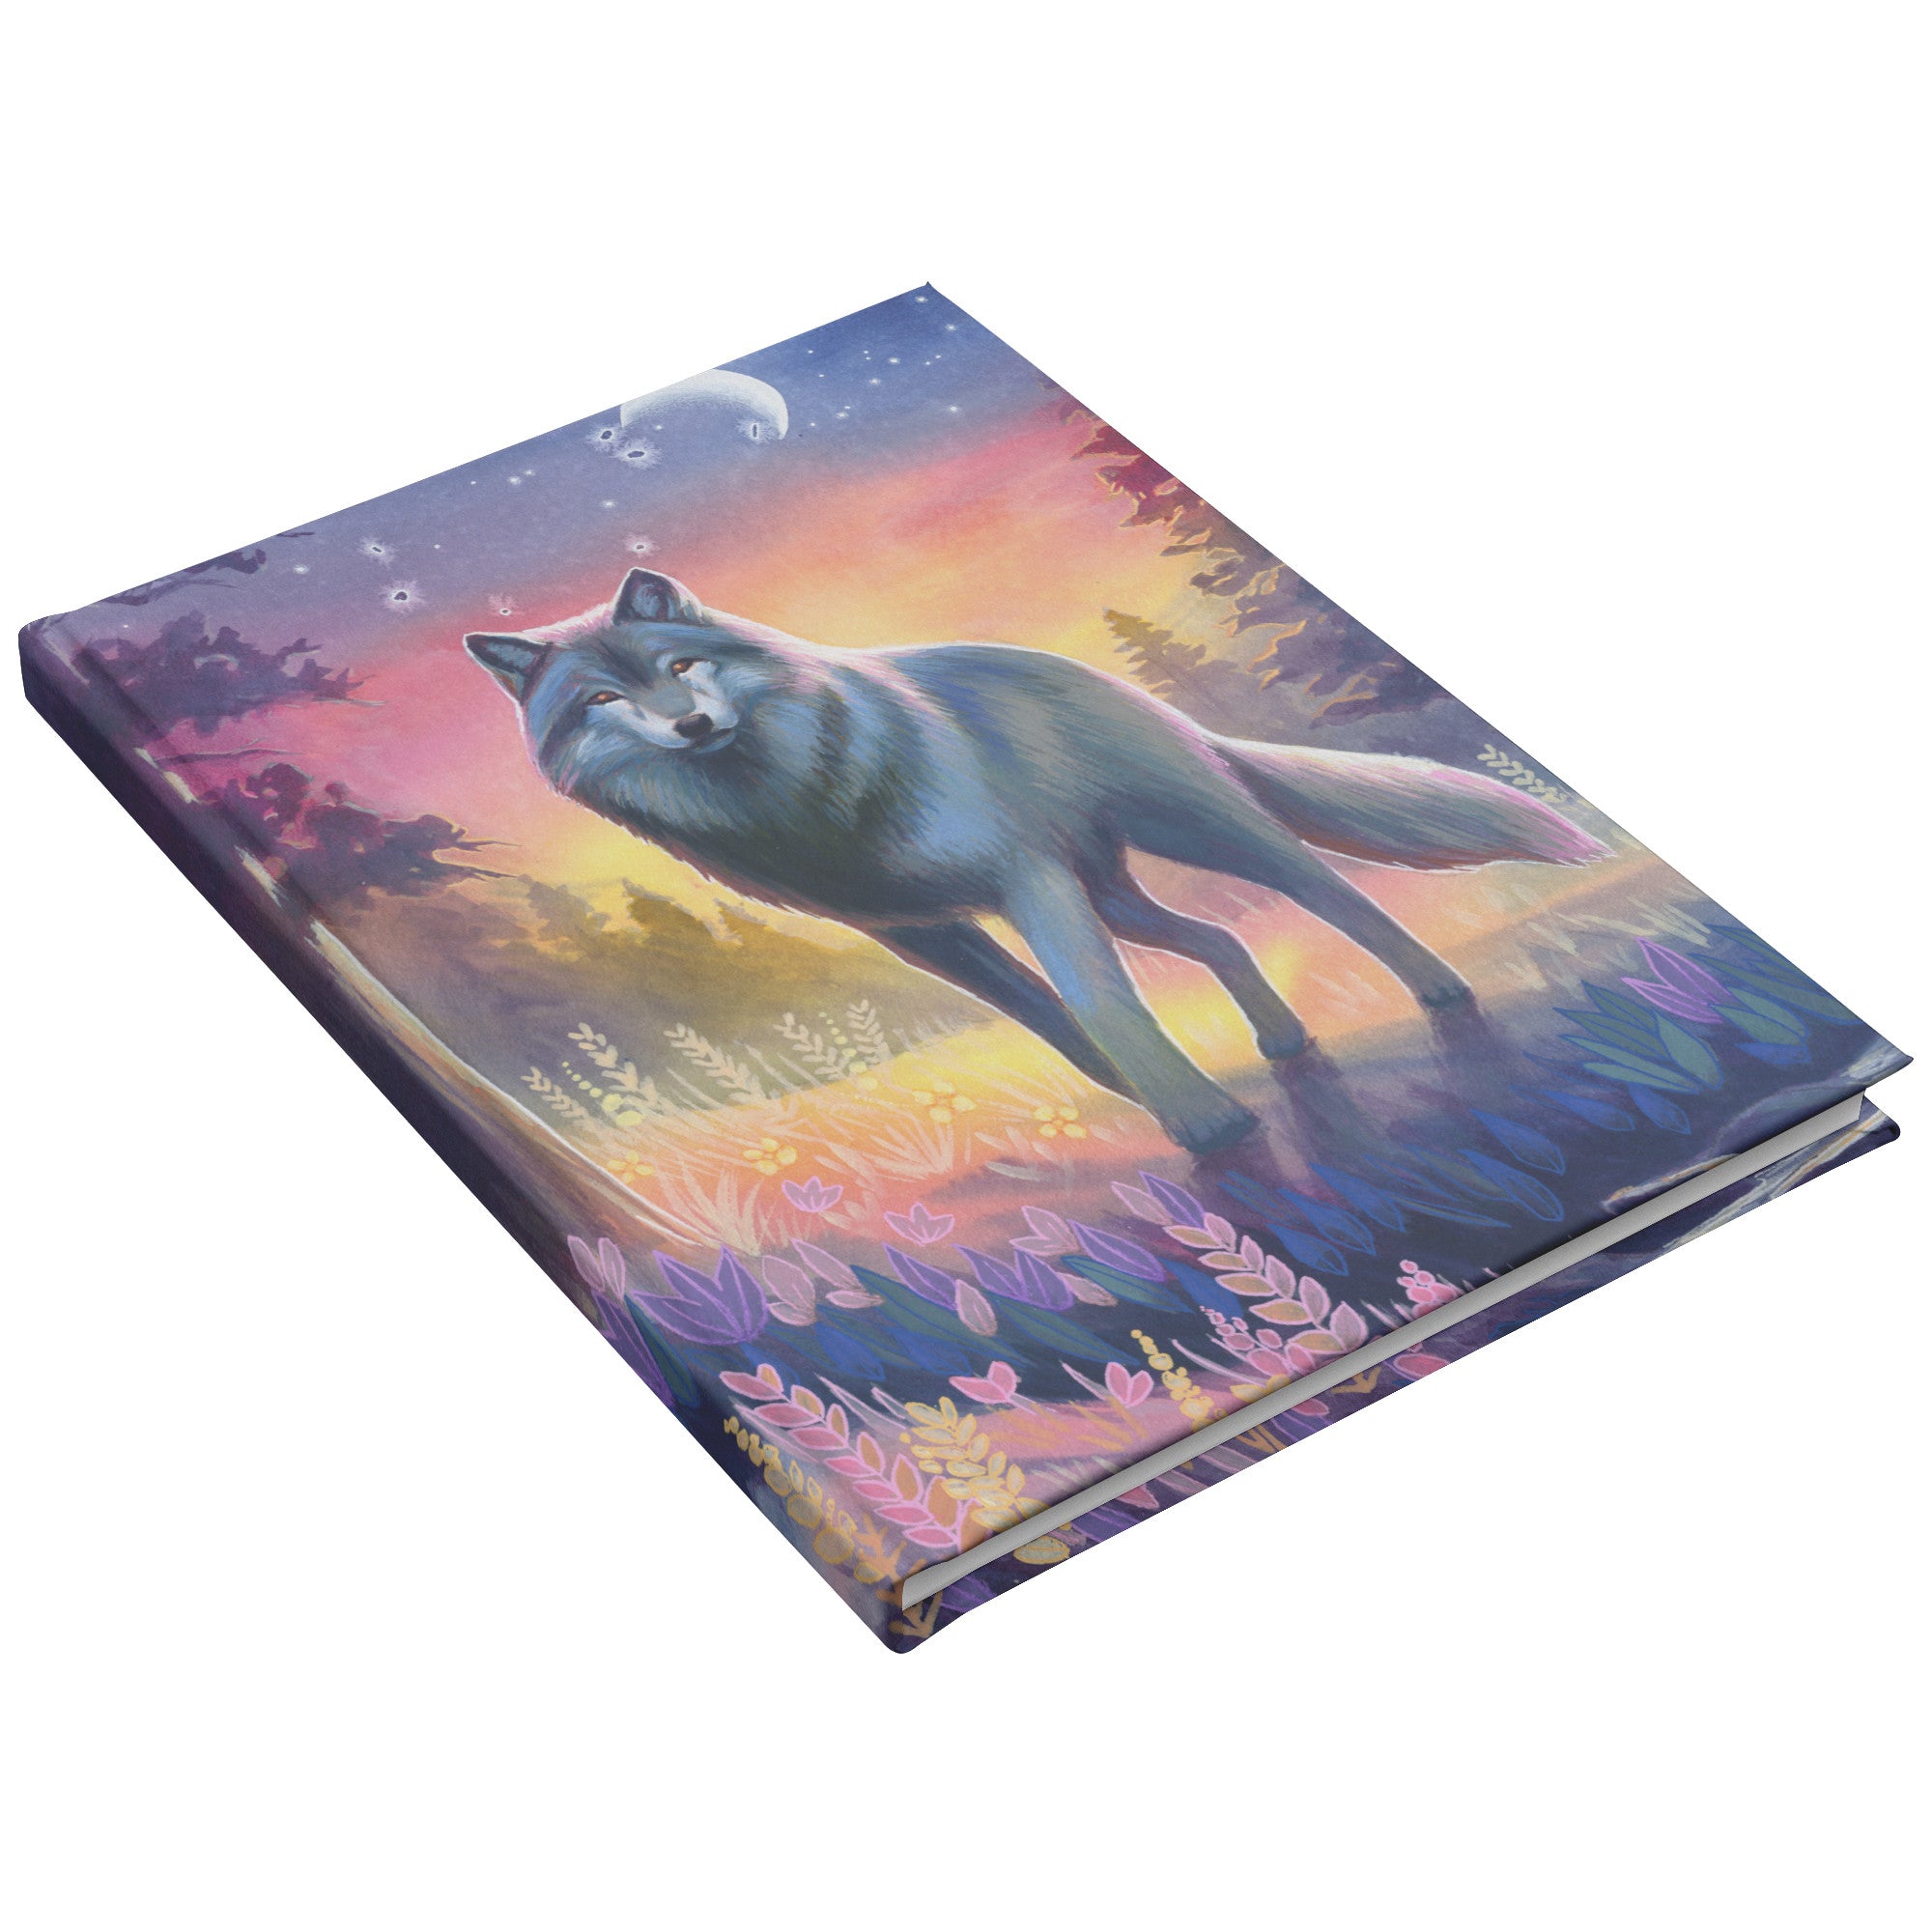 A vibrant Wolf Journal featuring a detailed painting of a wolf in a colorful, mystical forest under a starry sky.